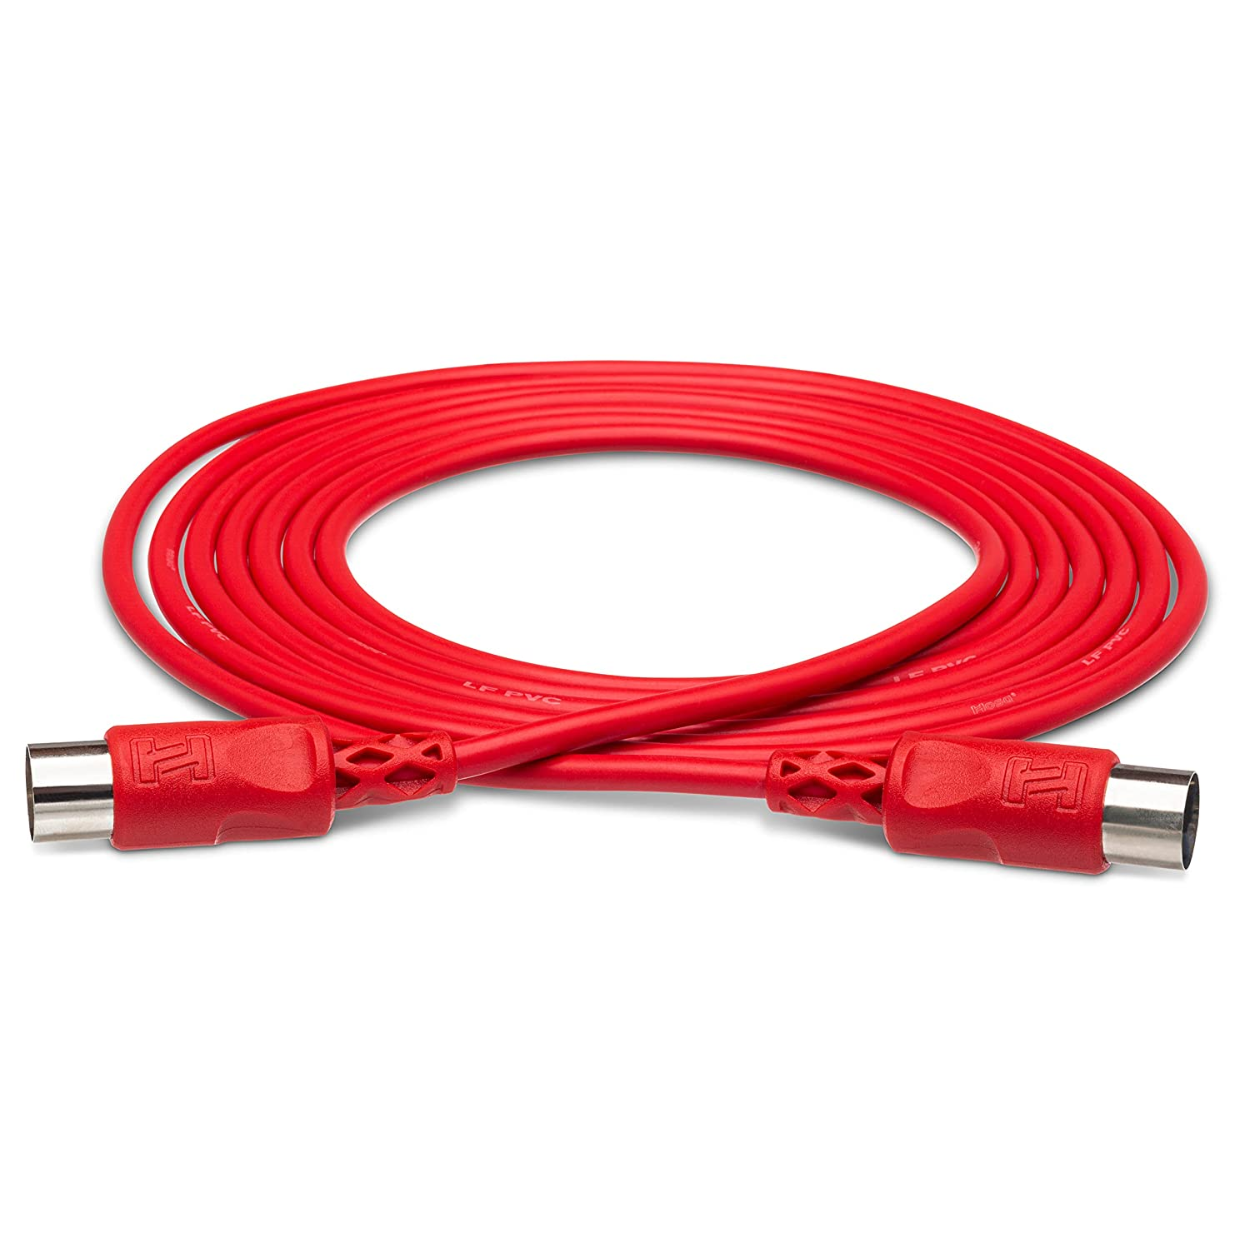 Hosa MID-310RD MIDI Cable, Red, 10ft